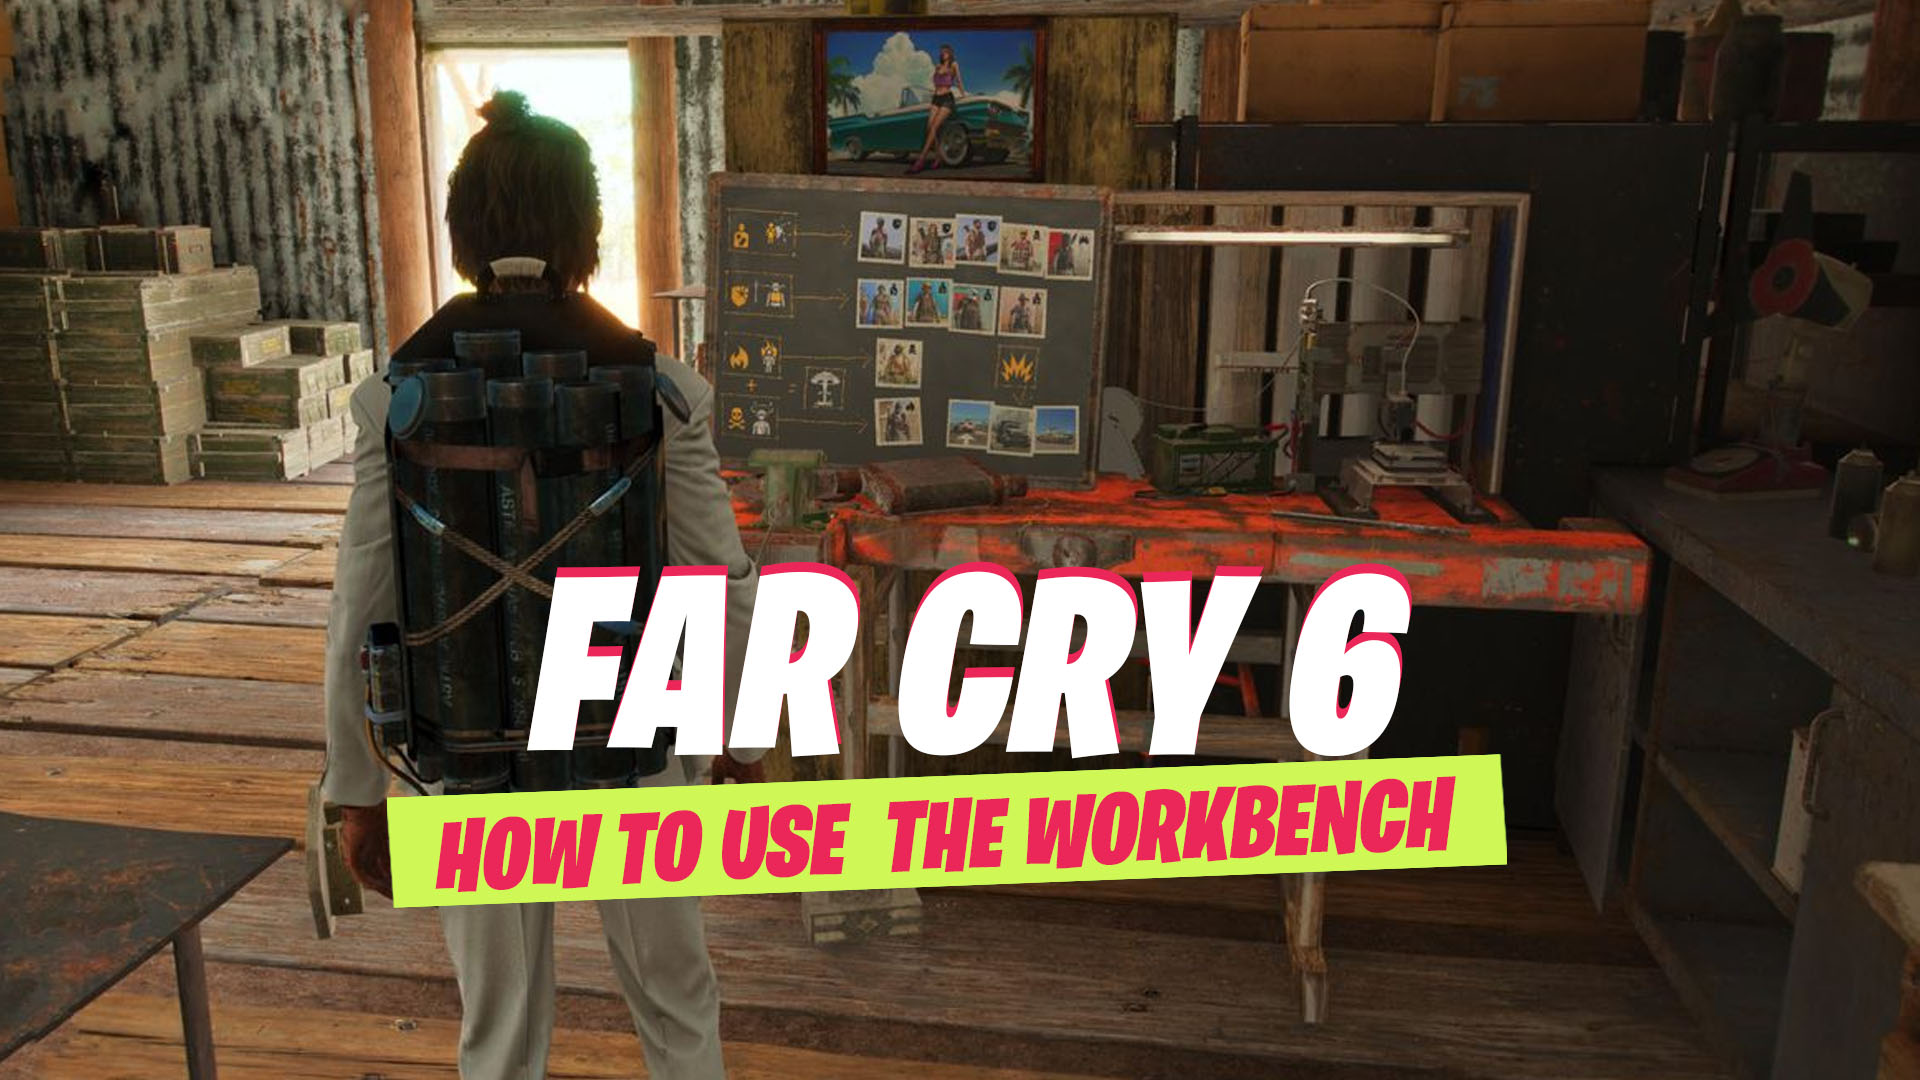 Far cry 6 how to use workbench